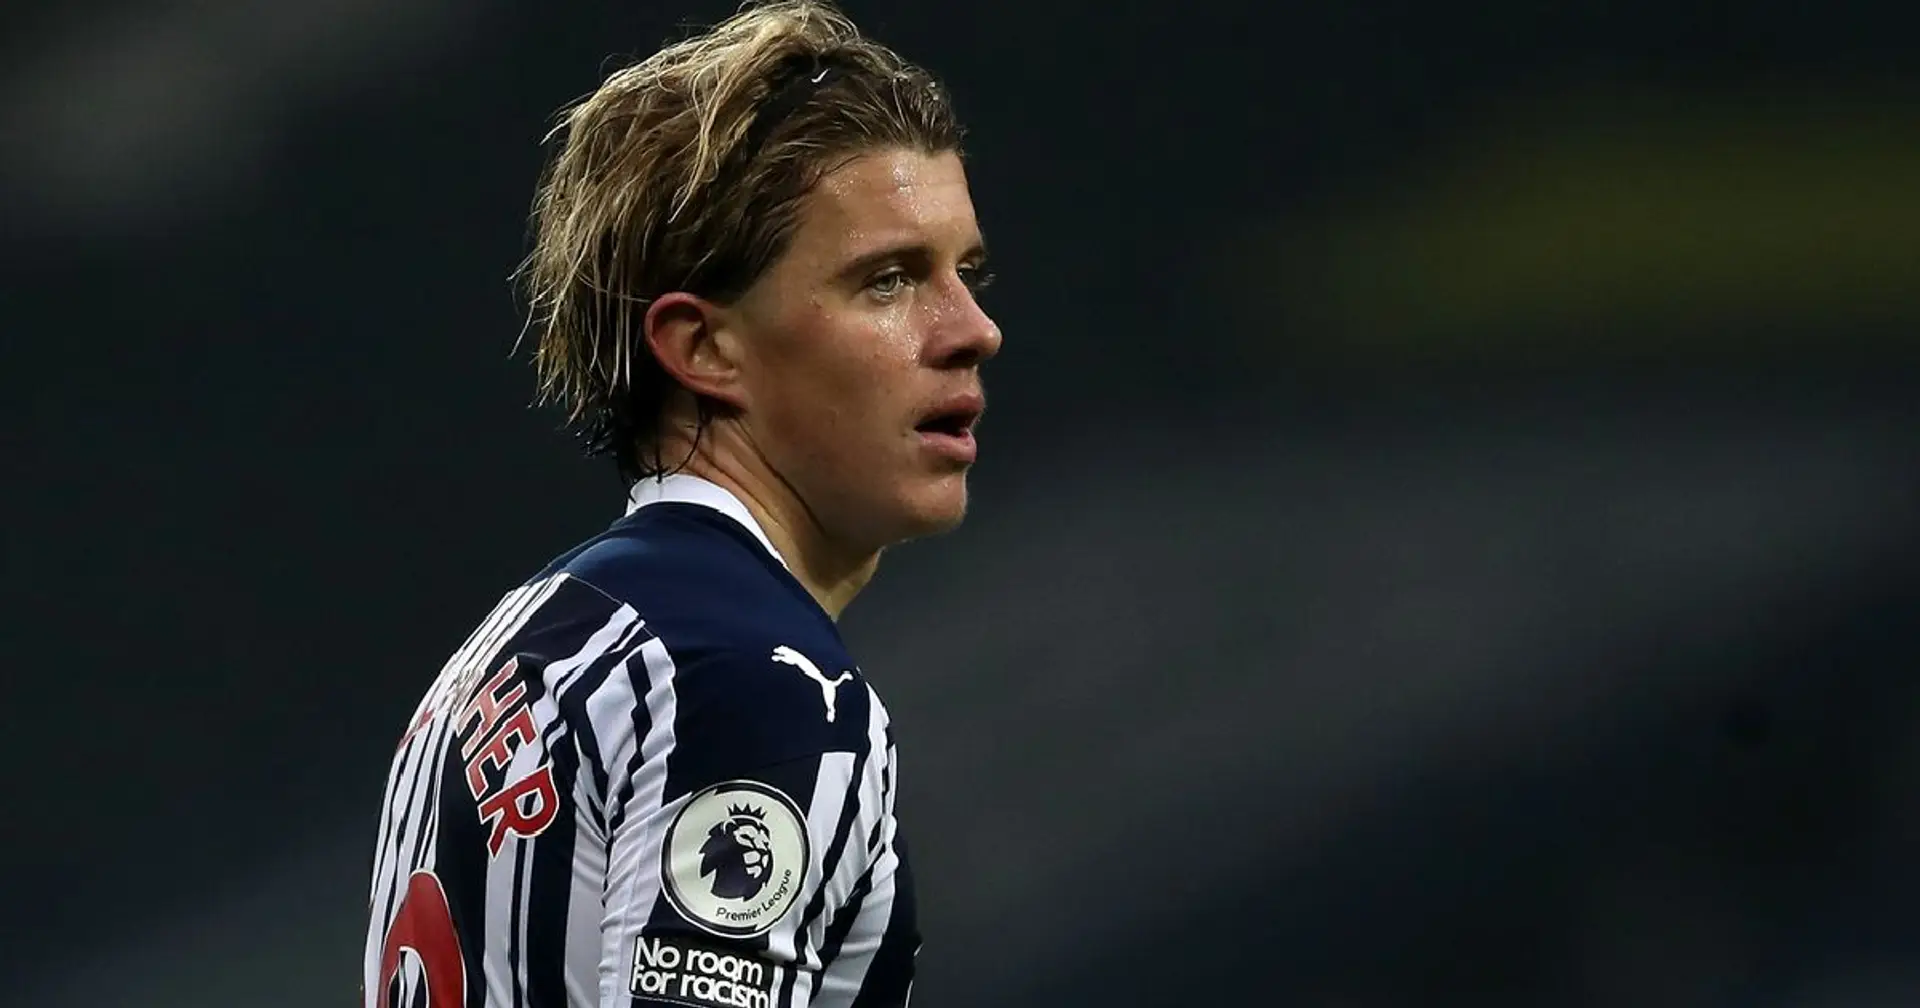 'His numbers are down': Blues fan explains why Gallagher staying at West Brom is problematic